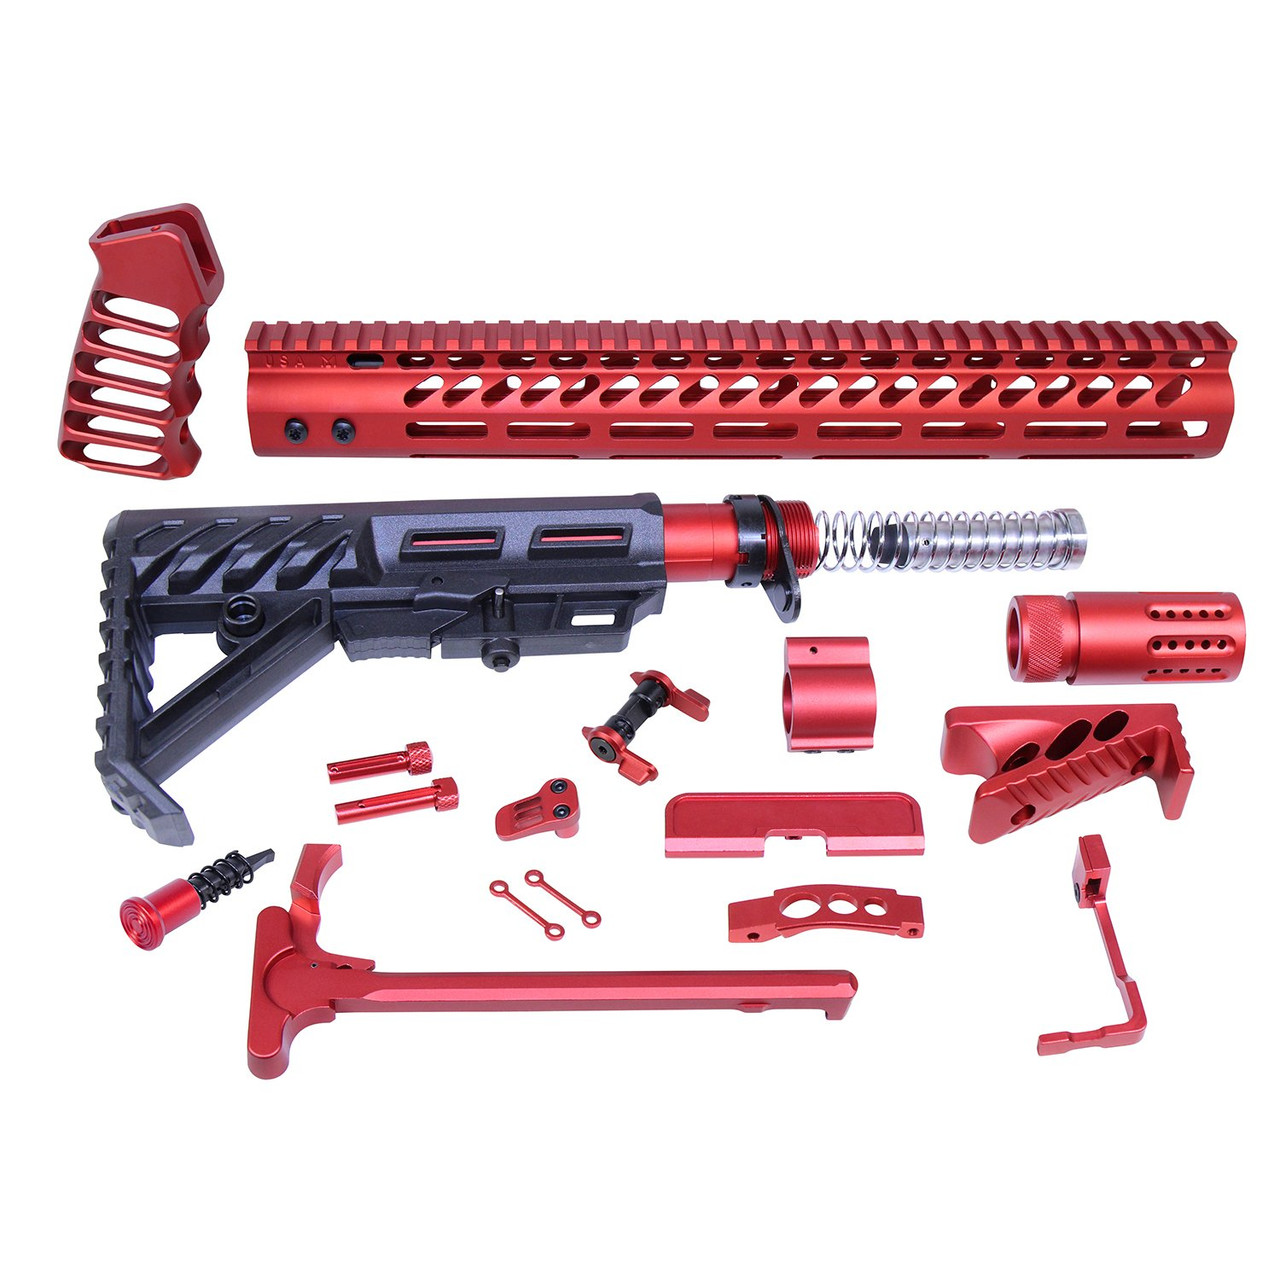 Guntec USA ULT-RK-RED AR-15 Ultimate Rifle Kit (Anodized Red)